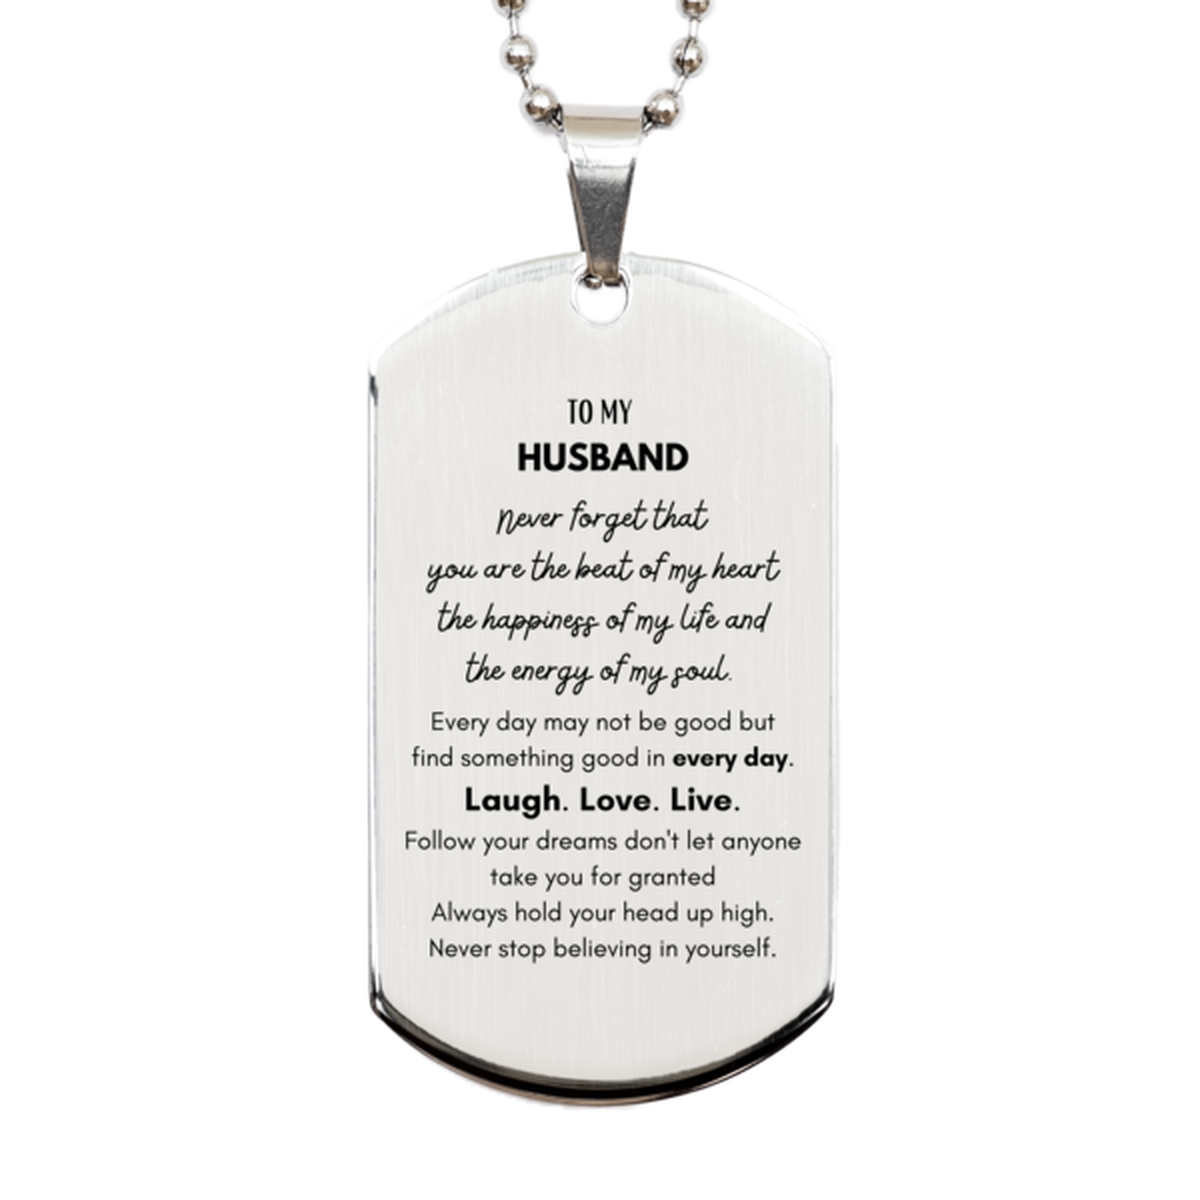 To My Husband Dogtag Gifts, Christmas Husband Silver Dog Tag Present, Birthday Unique Motivational For Husband, To My Husband Never forget that you are the beat of my heart the happiness of my life and the energy of my soul